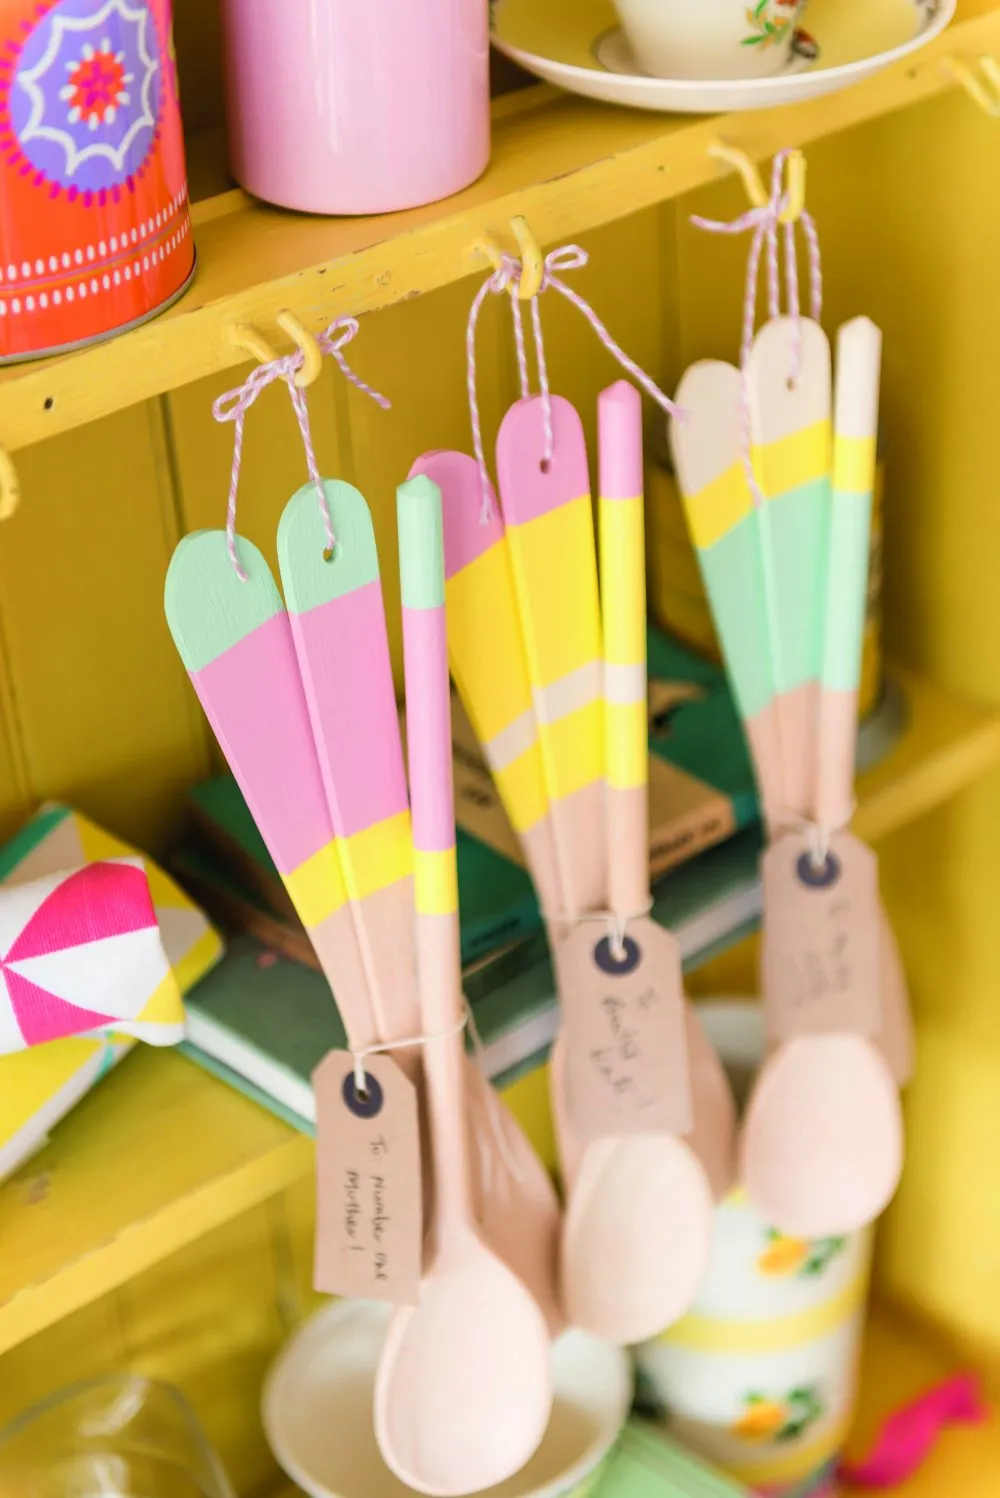 How to make pastel painted utensils